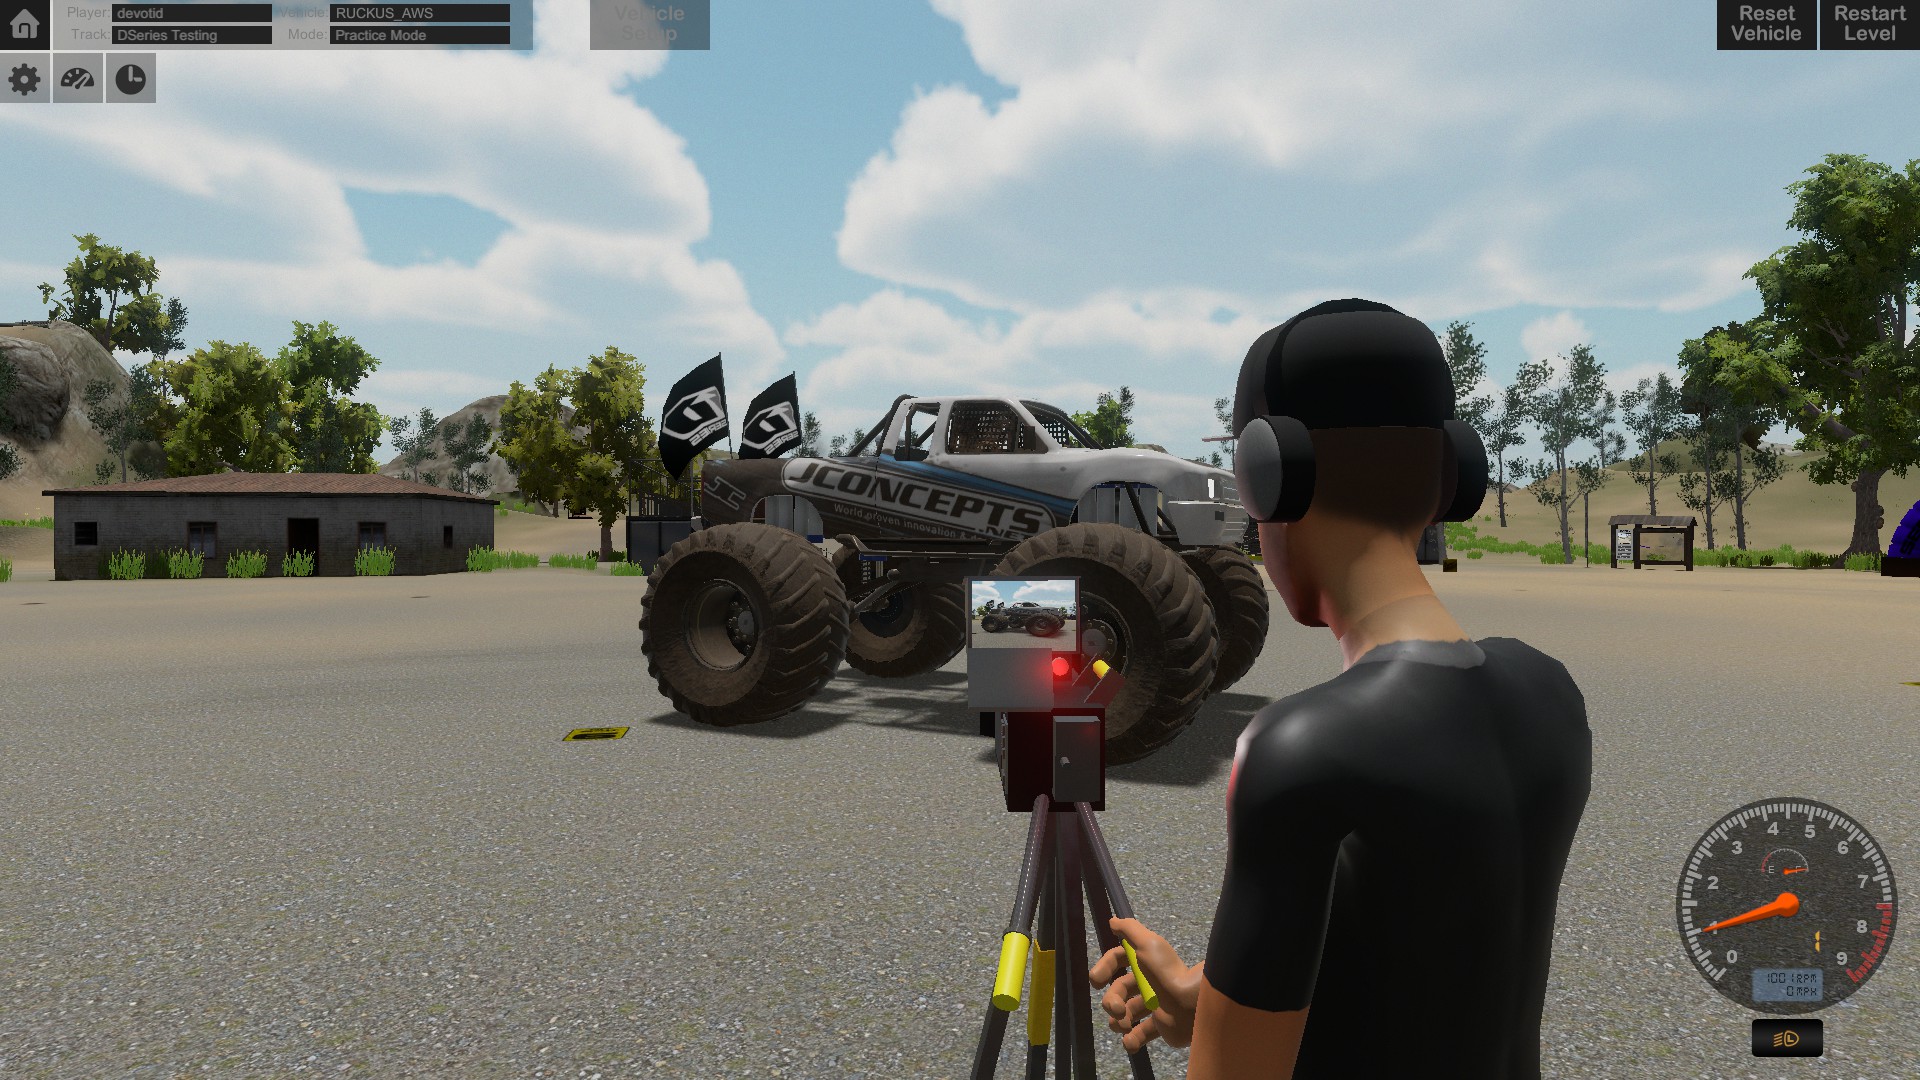 Offroad Vehicle Simulation downloading